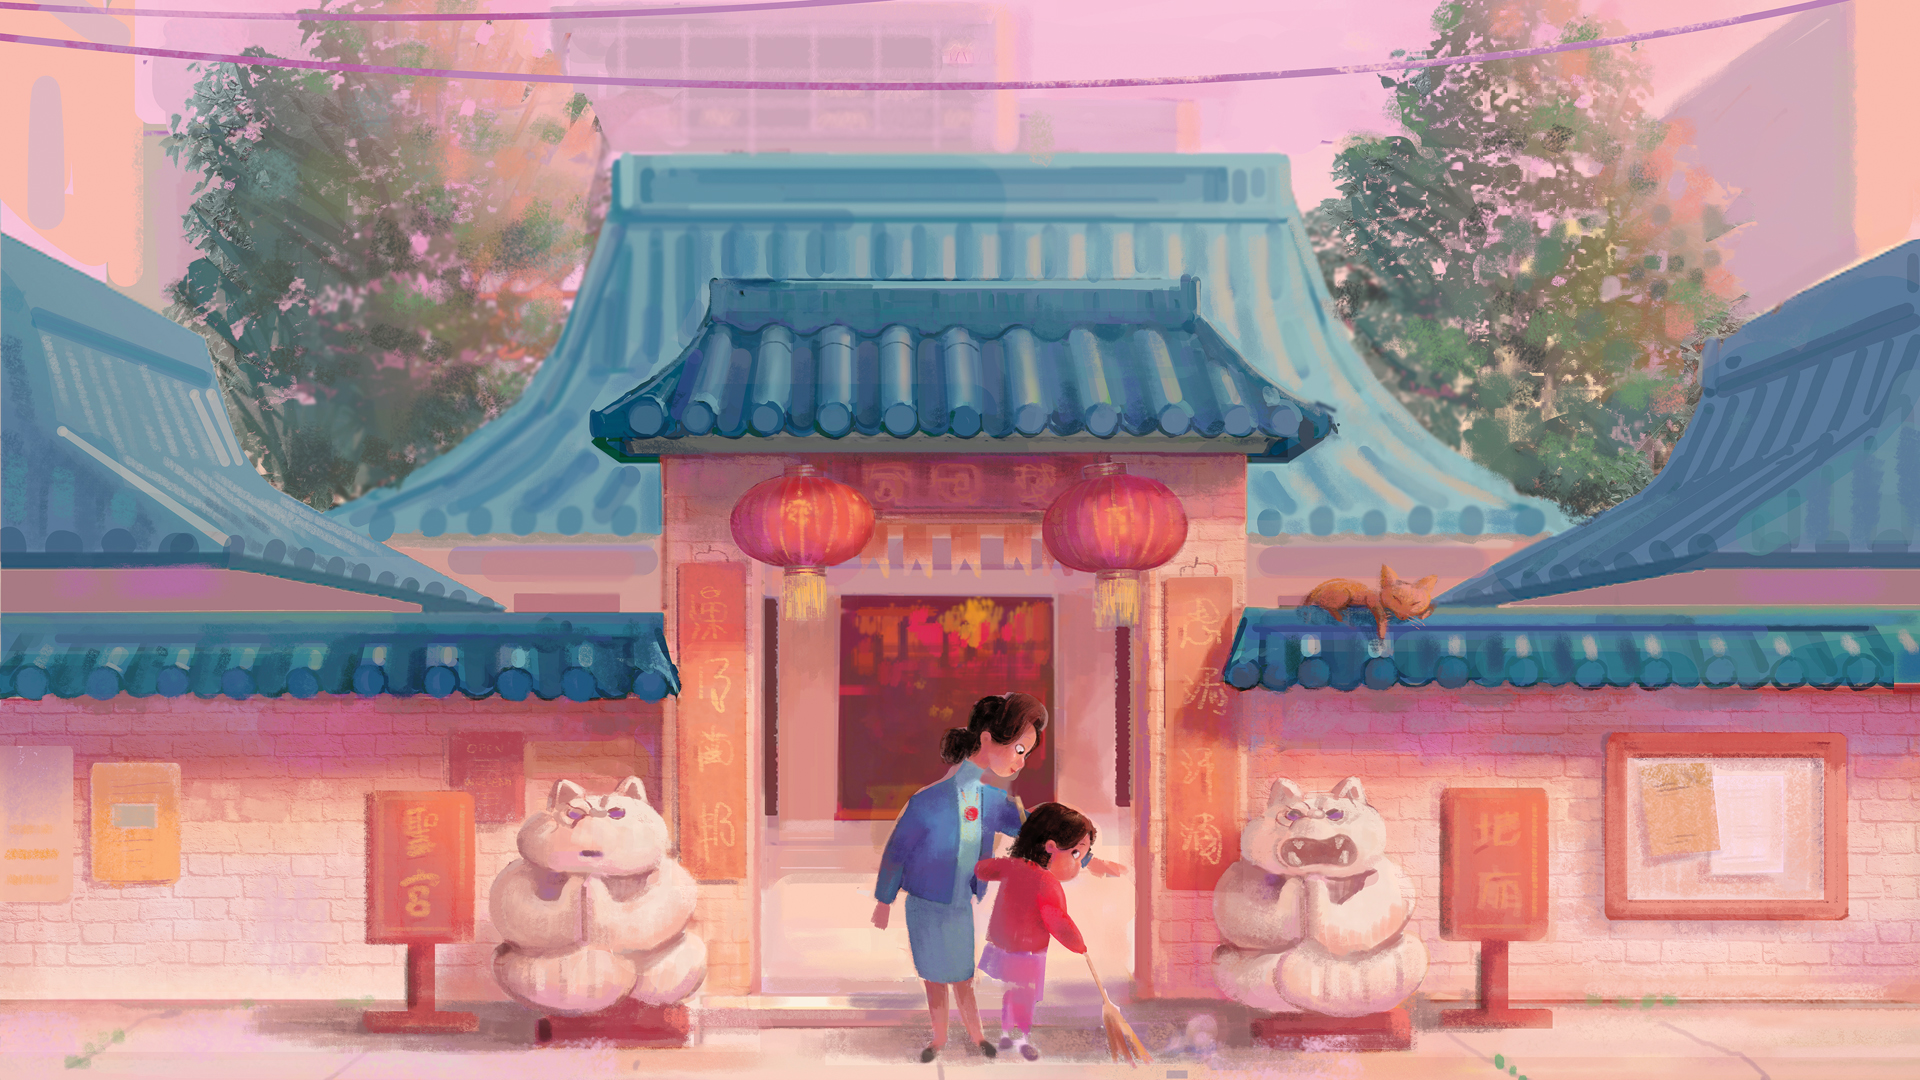 Concept art for the Lee family home in Pixar's Turning Red